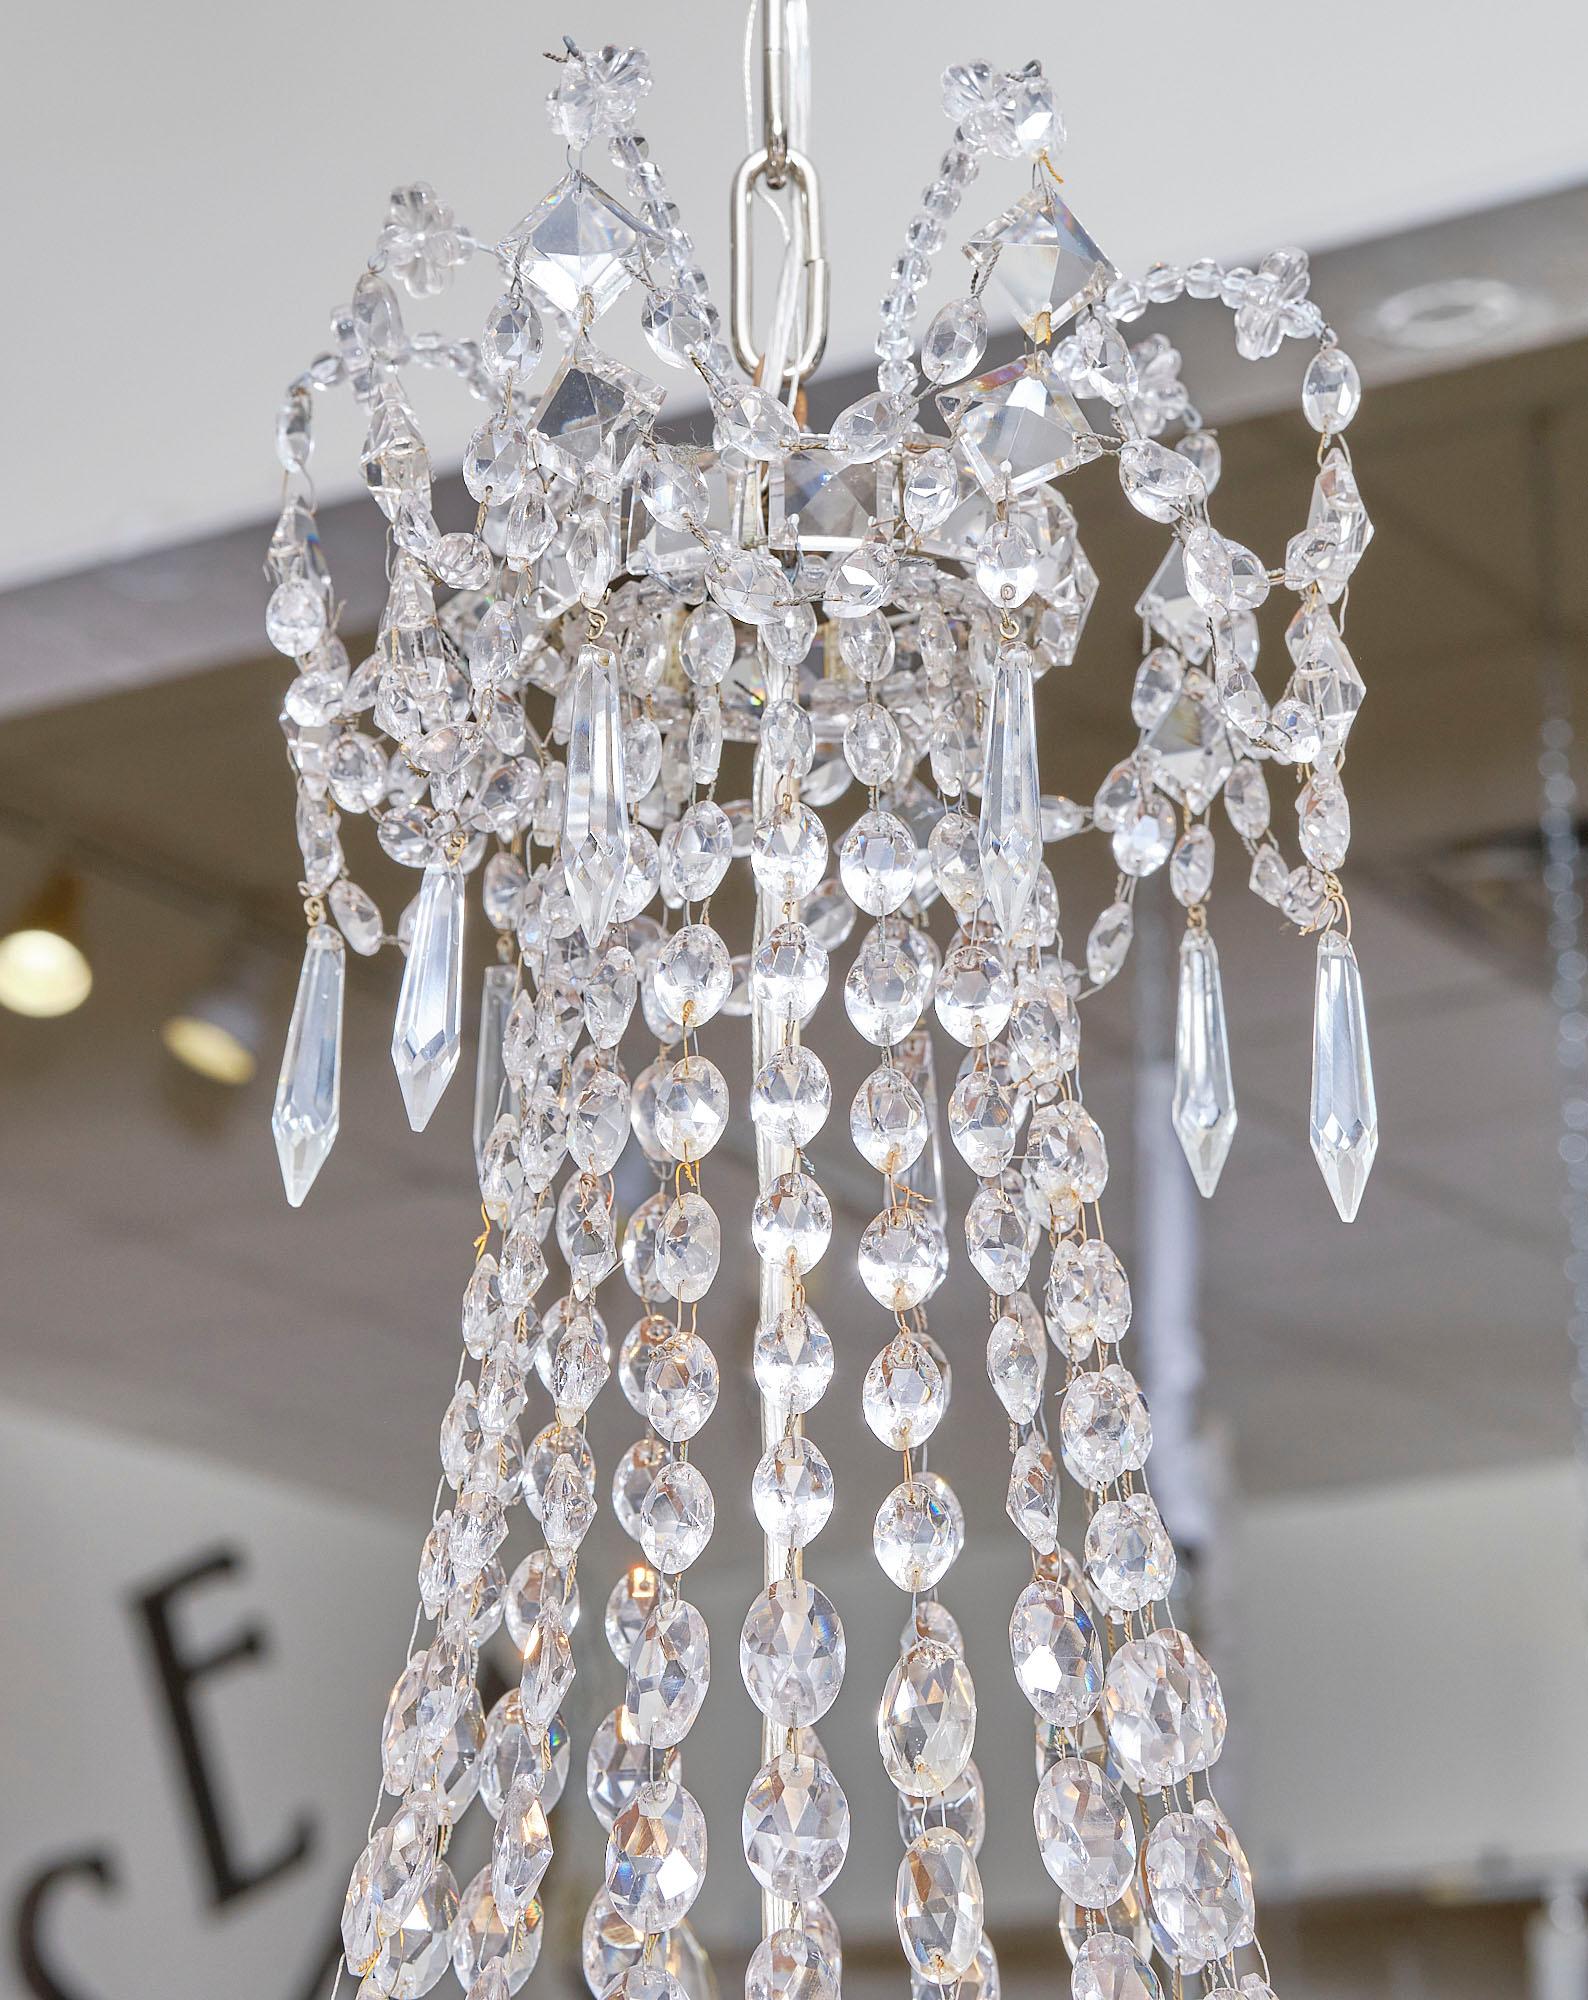 Early 20th Century Antique French Baccarat “Corbeille” Chandelier